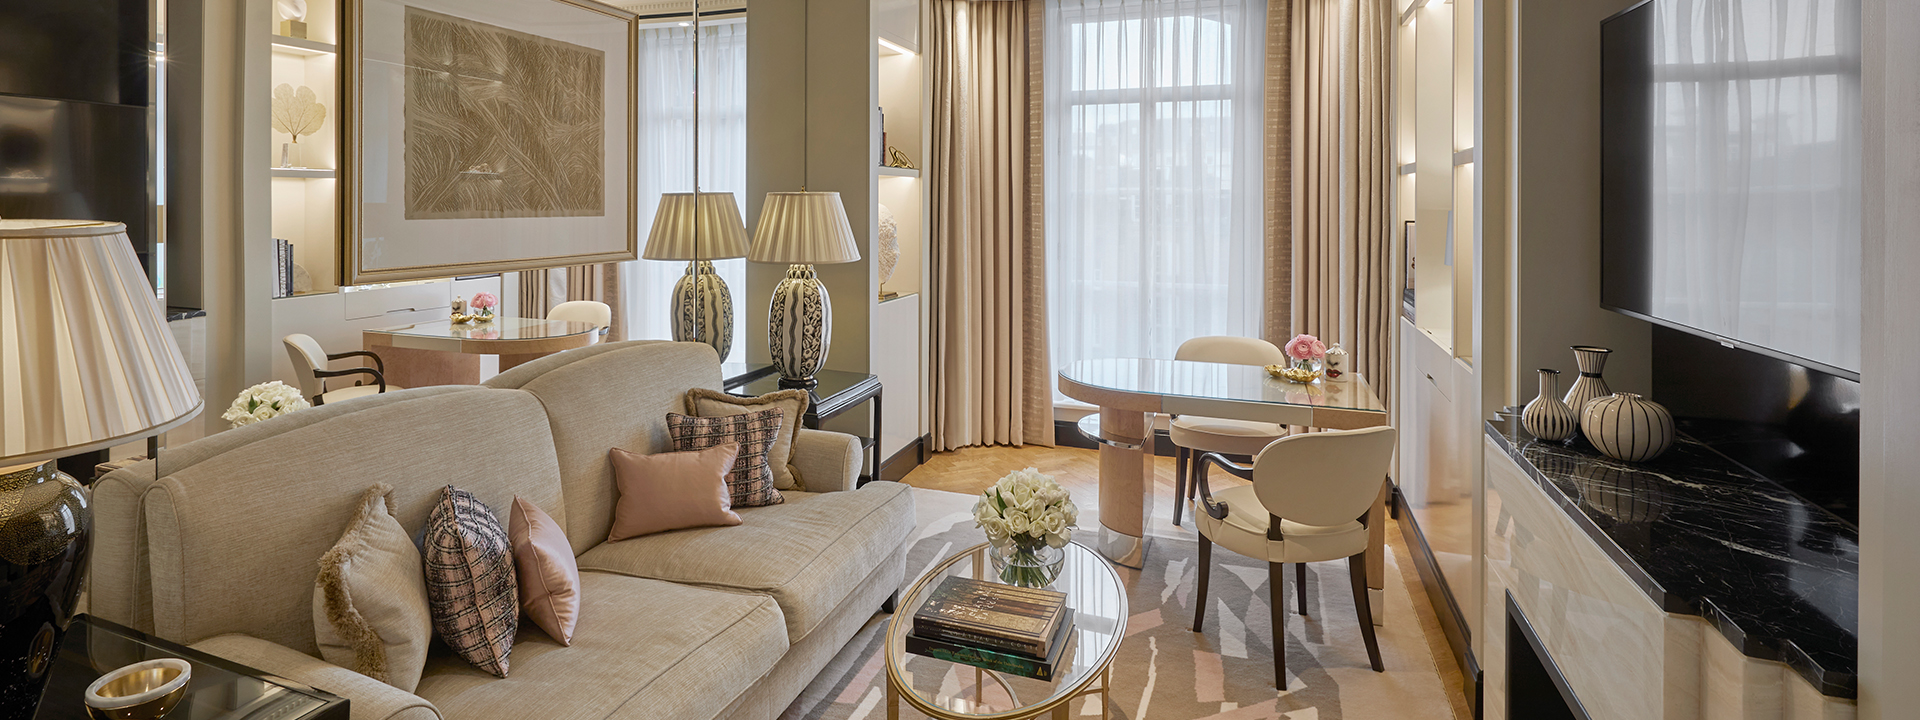 Spacious sitting area in the Deluxe Junior Suite, in neutral tones and luxurious details of the rich interior.